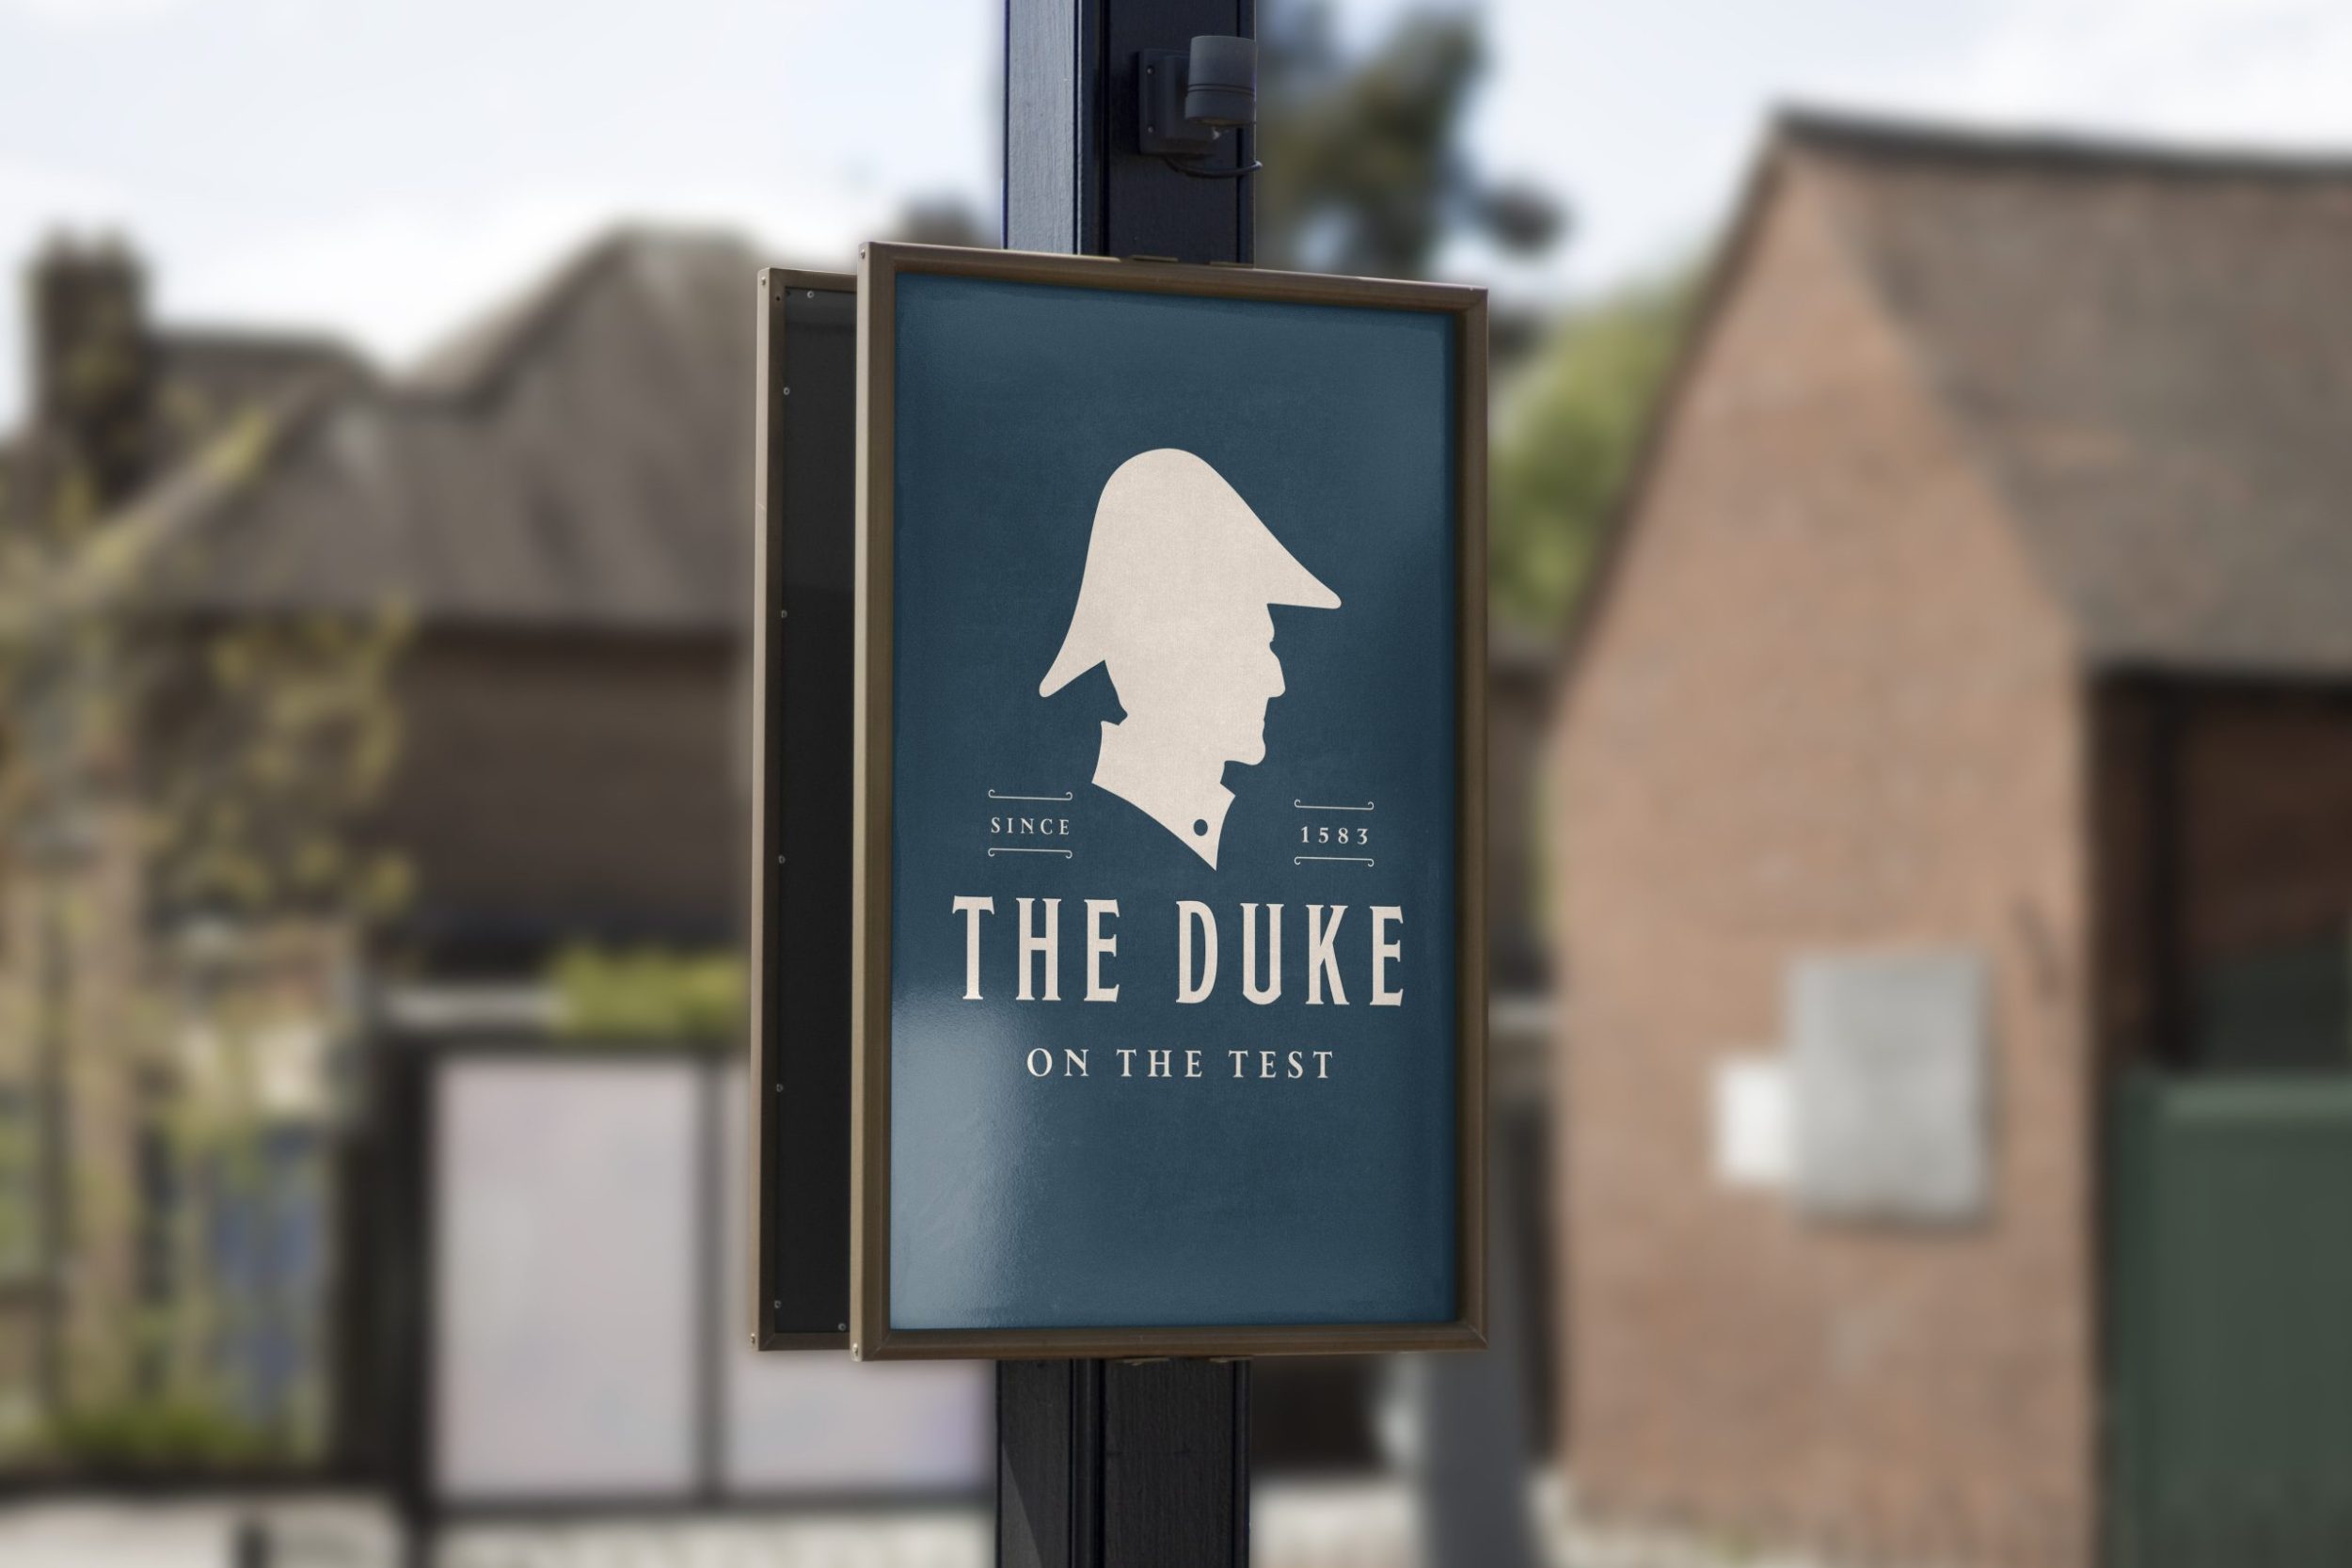 New brand identity, website and marketing campaign for a renovated pub restaurant with rooms in Hampshire